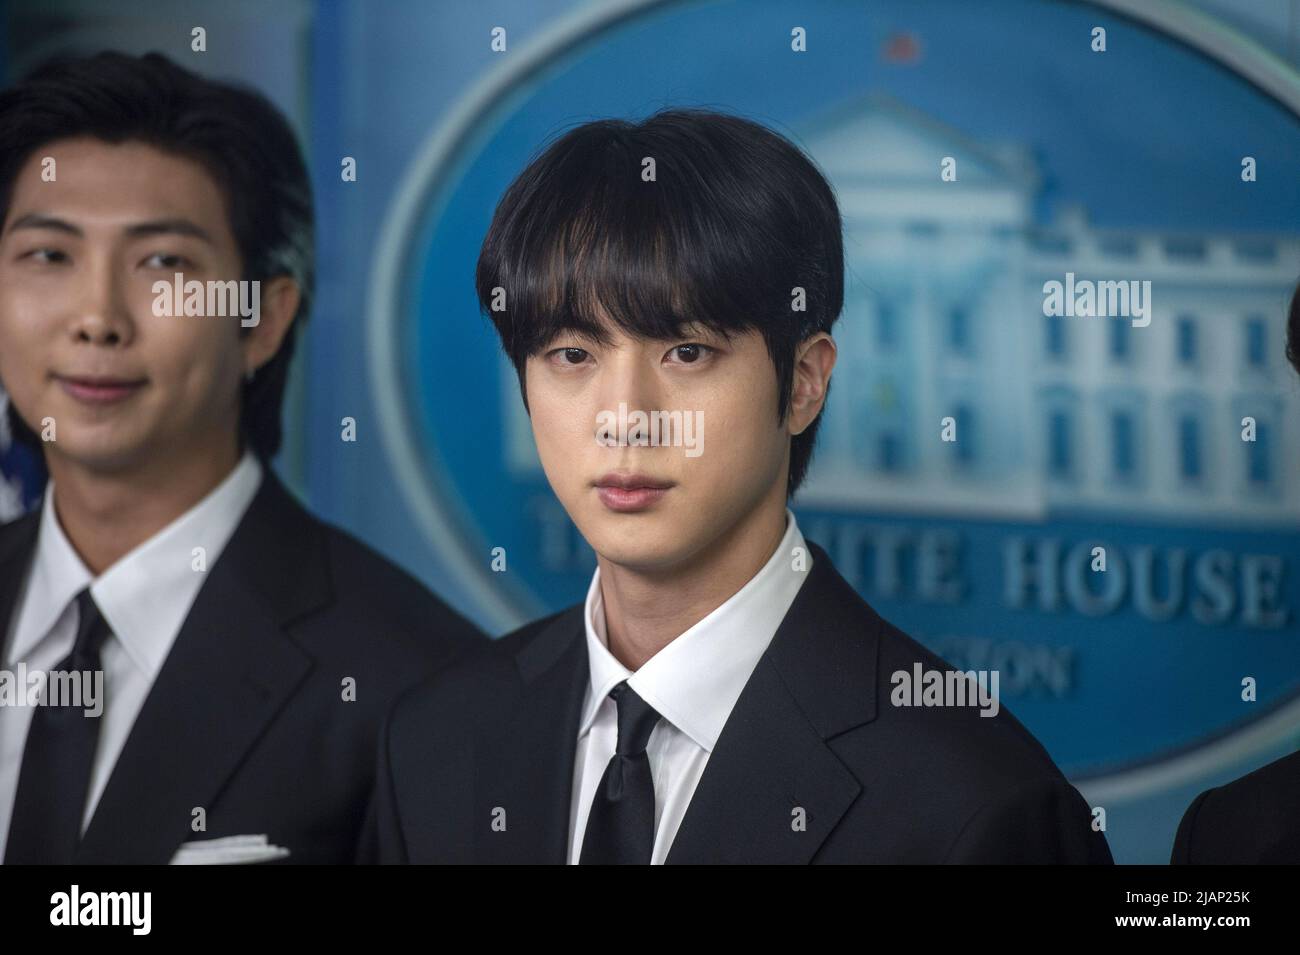 Washington, United States. 31st May, 2022. Kim Seok-jin, a member of the Korean Pop band BTS, looks on during the daily press briefing at the White House in Washington, DC on Tuesday, May 31, 2022. Afterwards, BTS met with President Joe Biden in the Oval Office to discuss Anti-Asian discrimination and Asian inclusion and representation. Photo by Bonnie Cash/UPI Credit: UPI/Alamy Live News Stock Photo